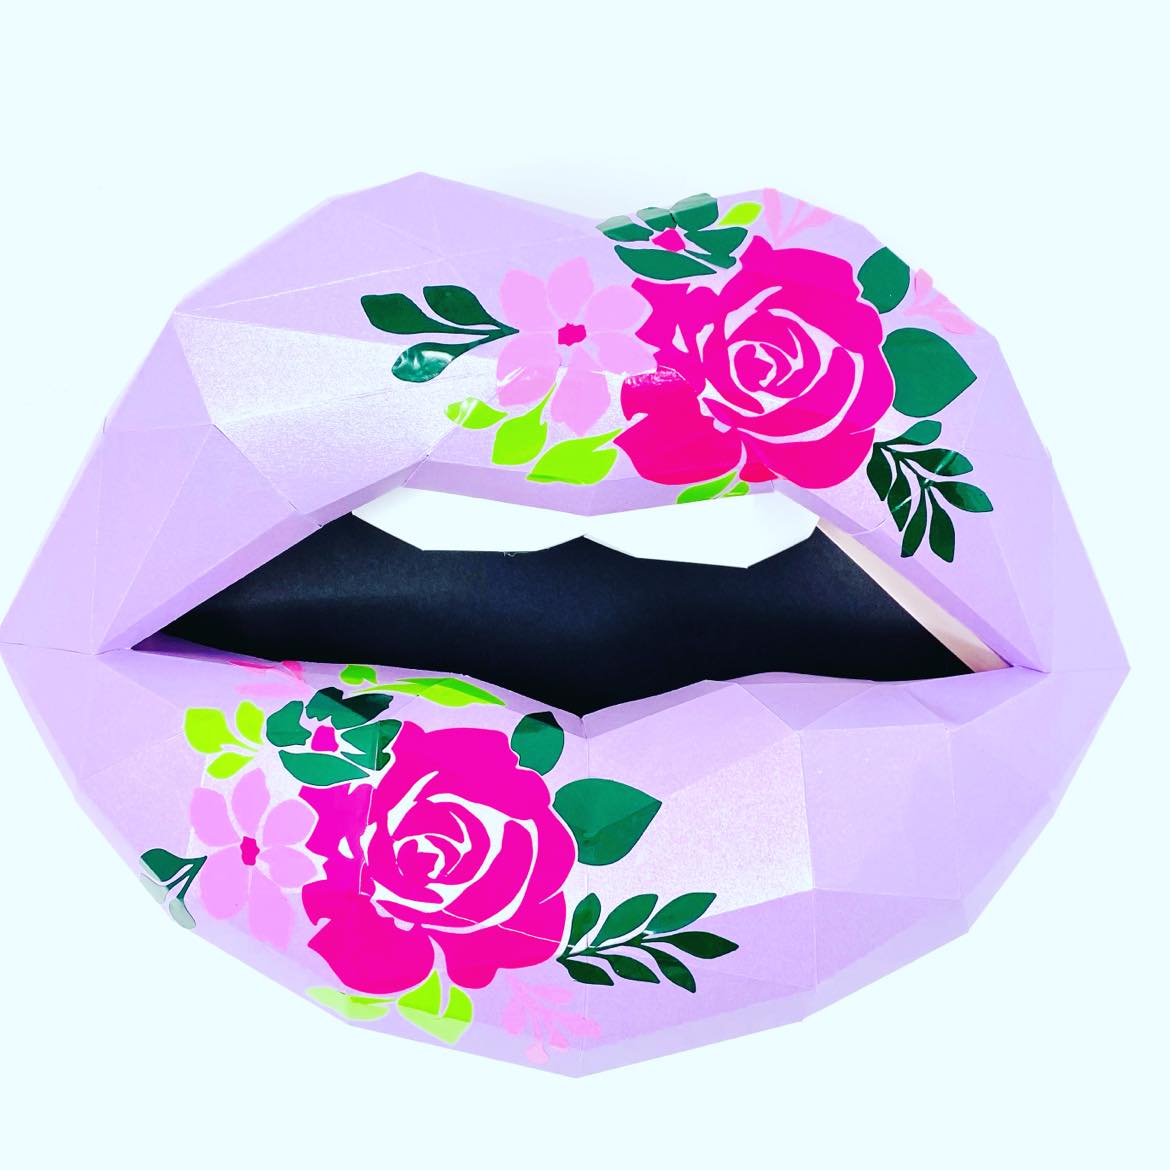 Mothe's day inspired paper lips  Wall Art for Home Office or Salon |  Fashion Lover | Gift for Makeup Artist - Pucker Up Lips and Accessories